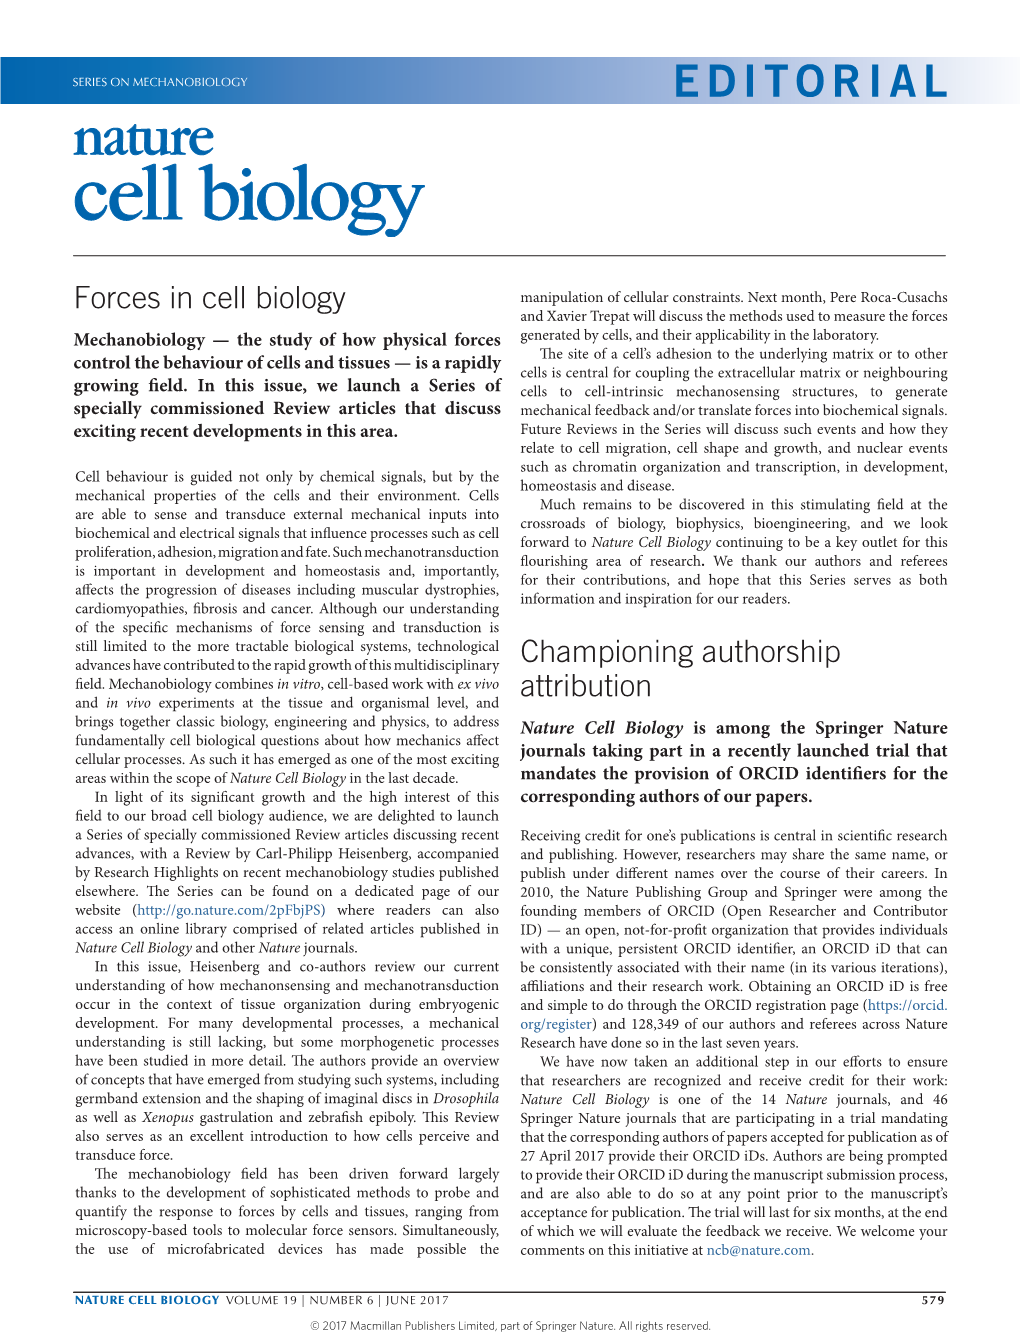 Forces in Cell Biology Manipulation of Cellular Constraints